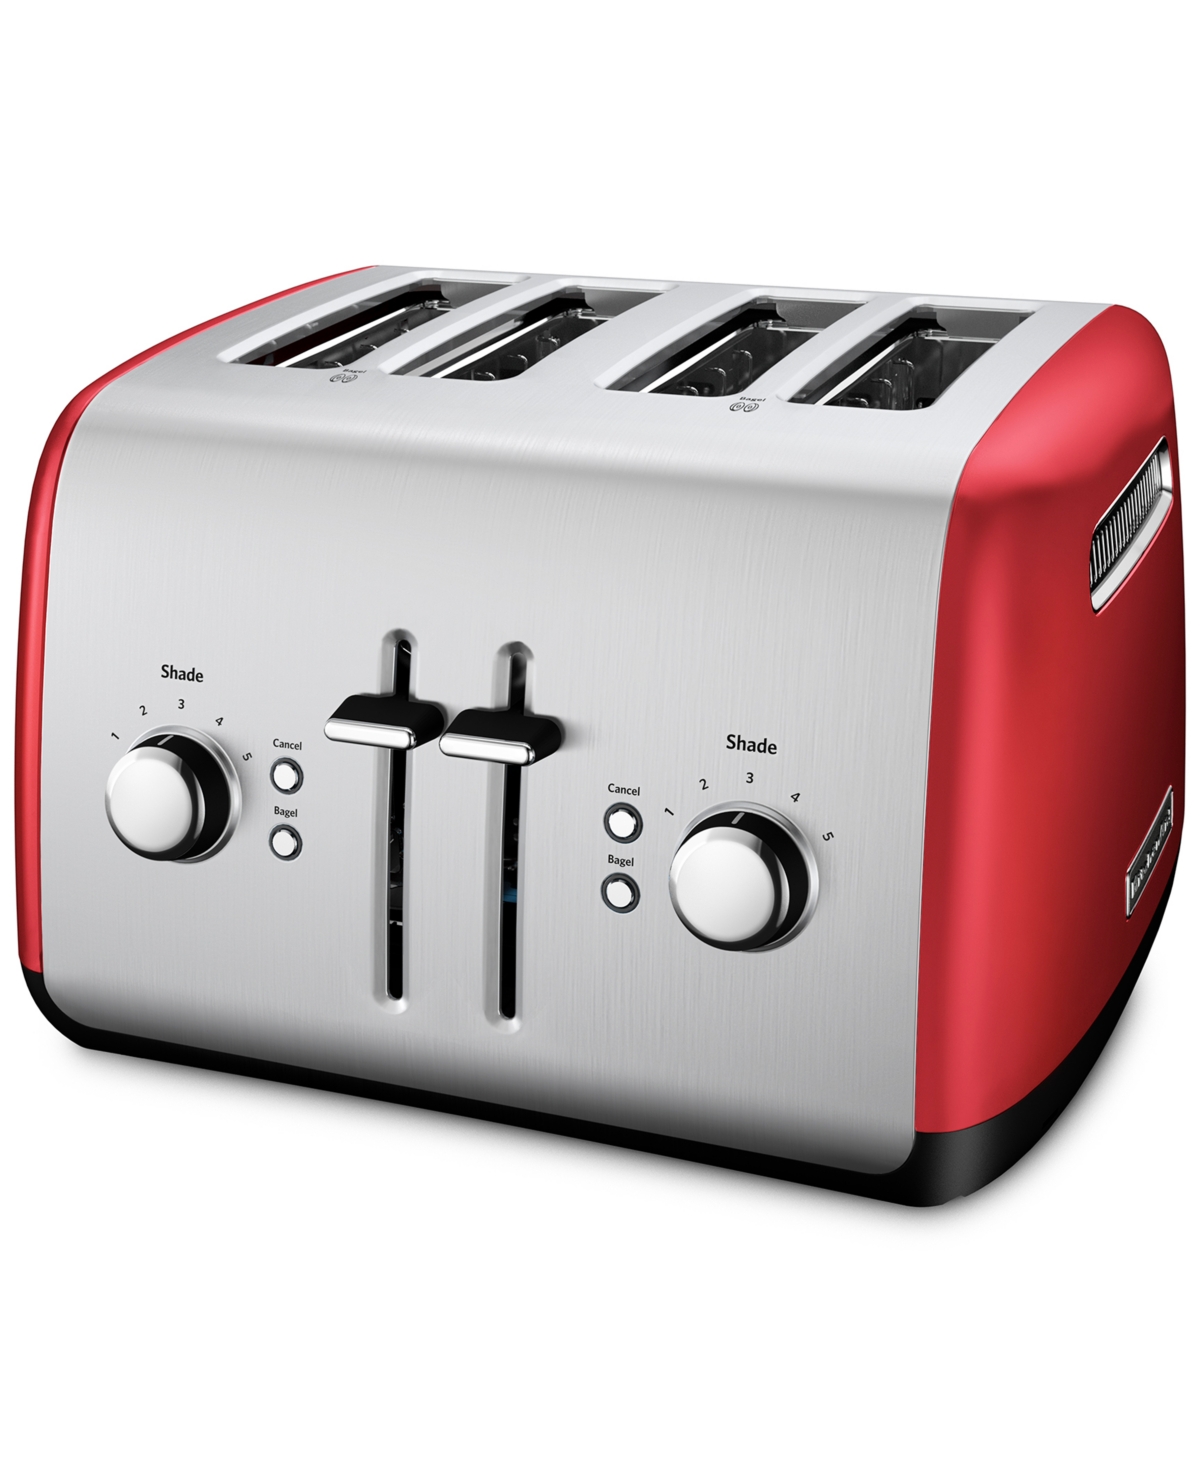 Kitchenaid Kmt4115 4-slice Toaster With Manual High-lift Lever In Empire Red